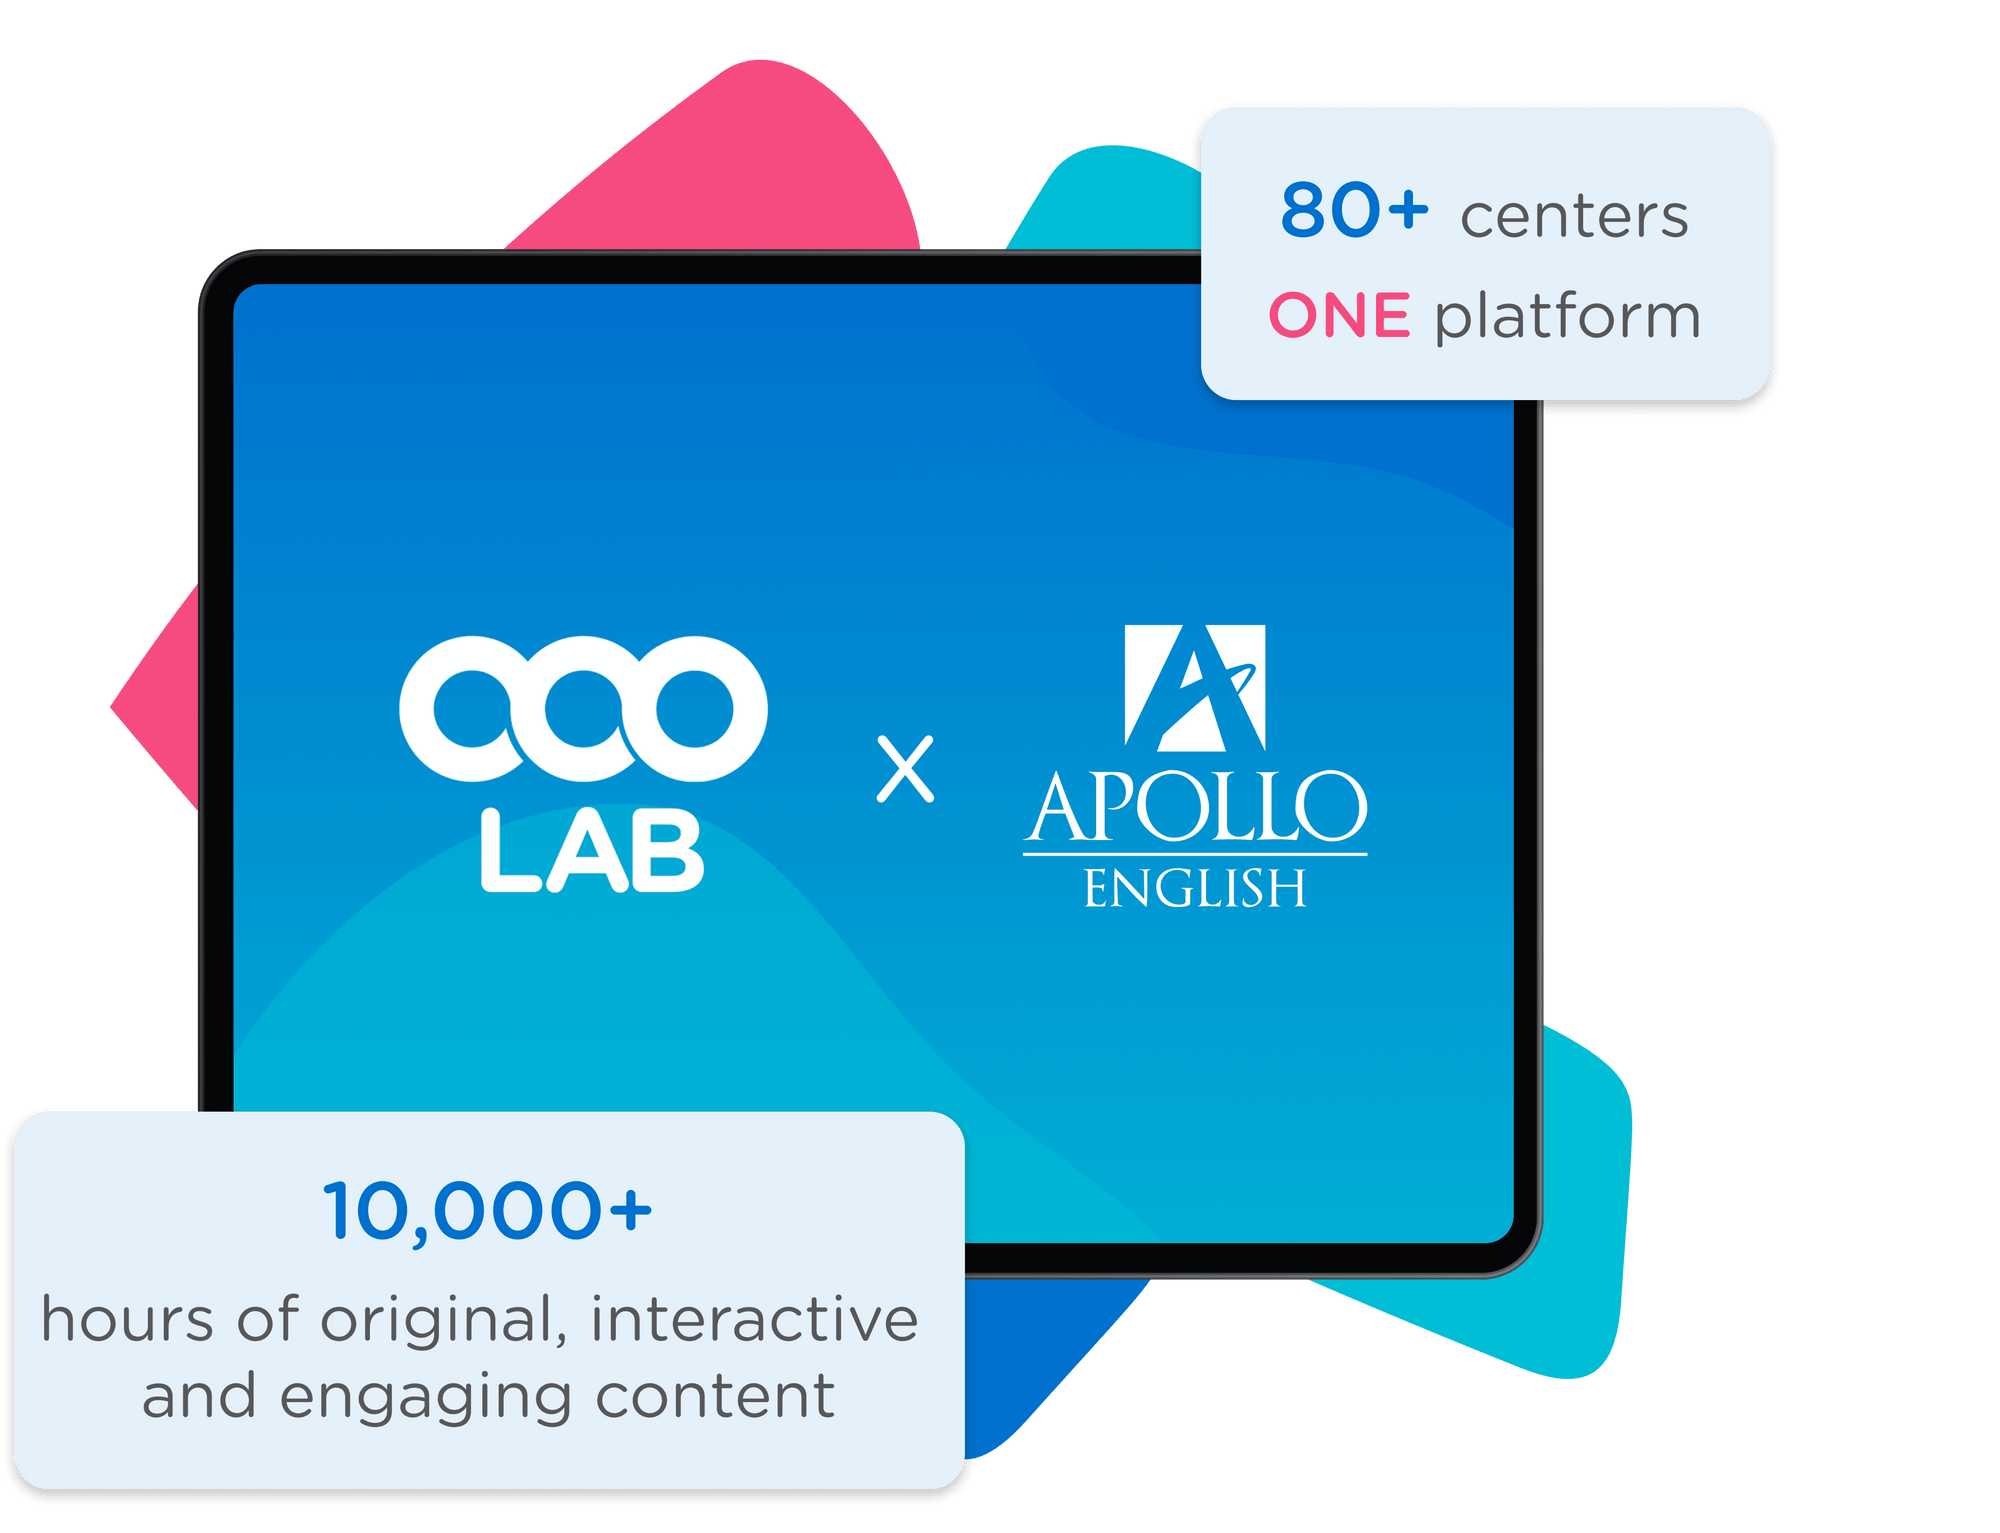 OOOLAB case study: 10,000+ interactive hours of content transformed learning operations, empowering 80+ learning centers on one platform.